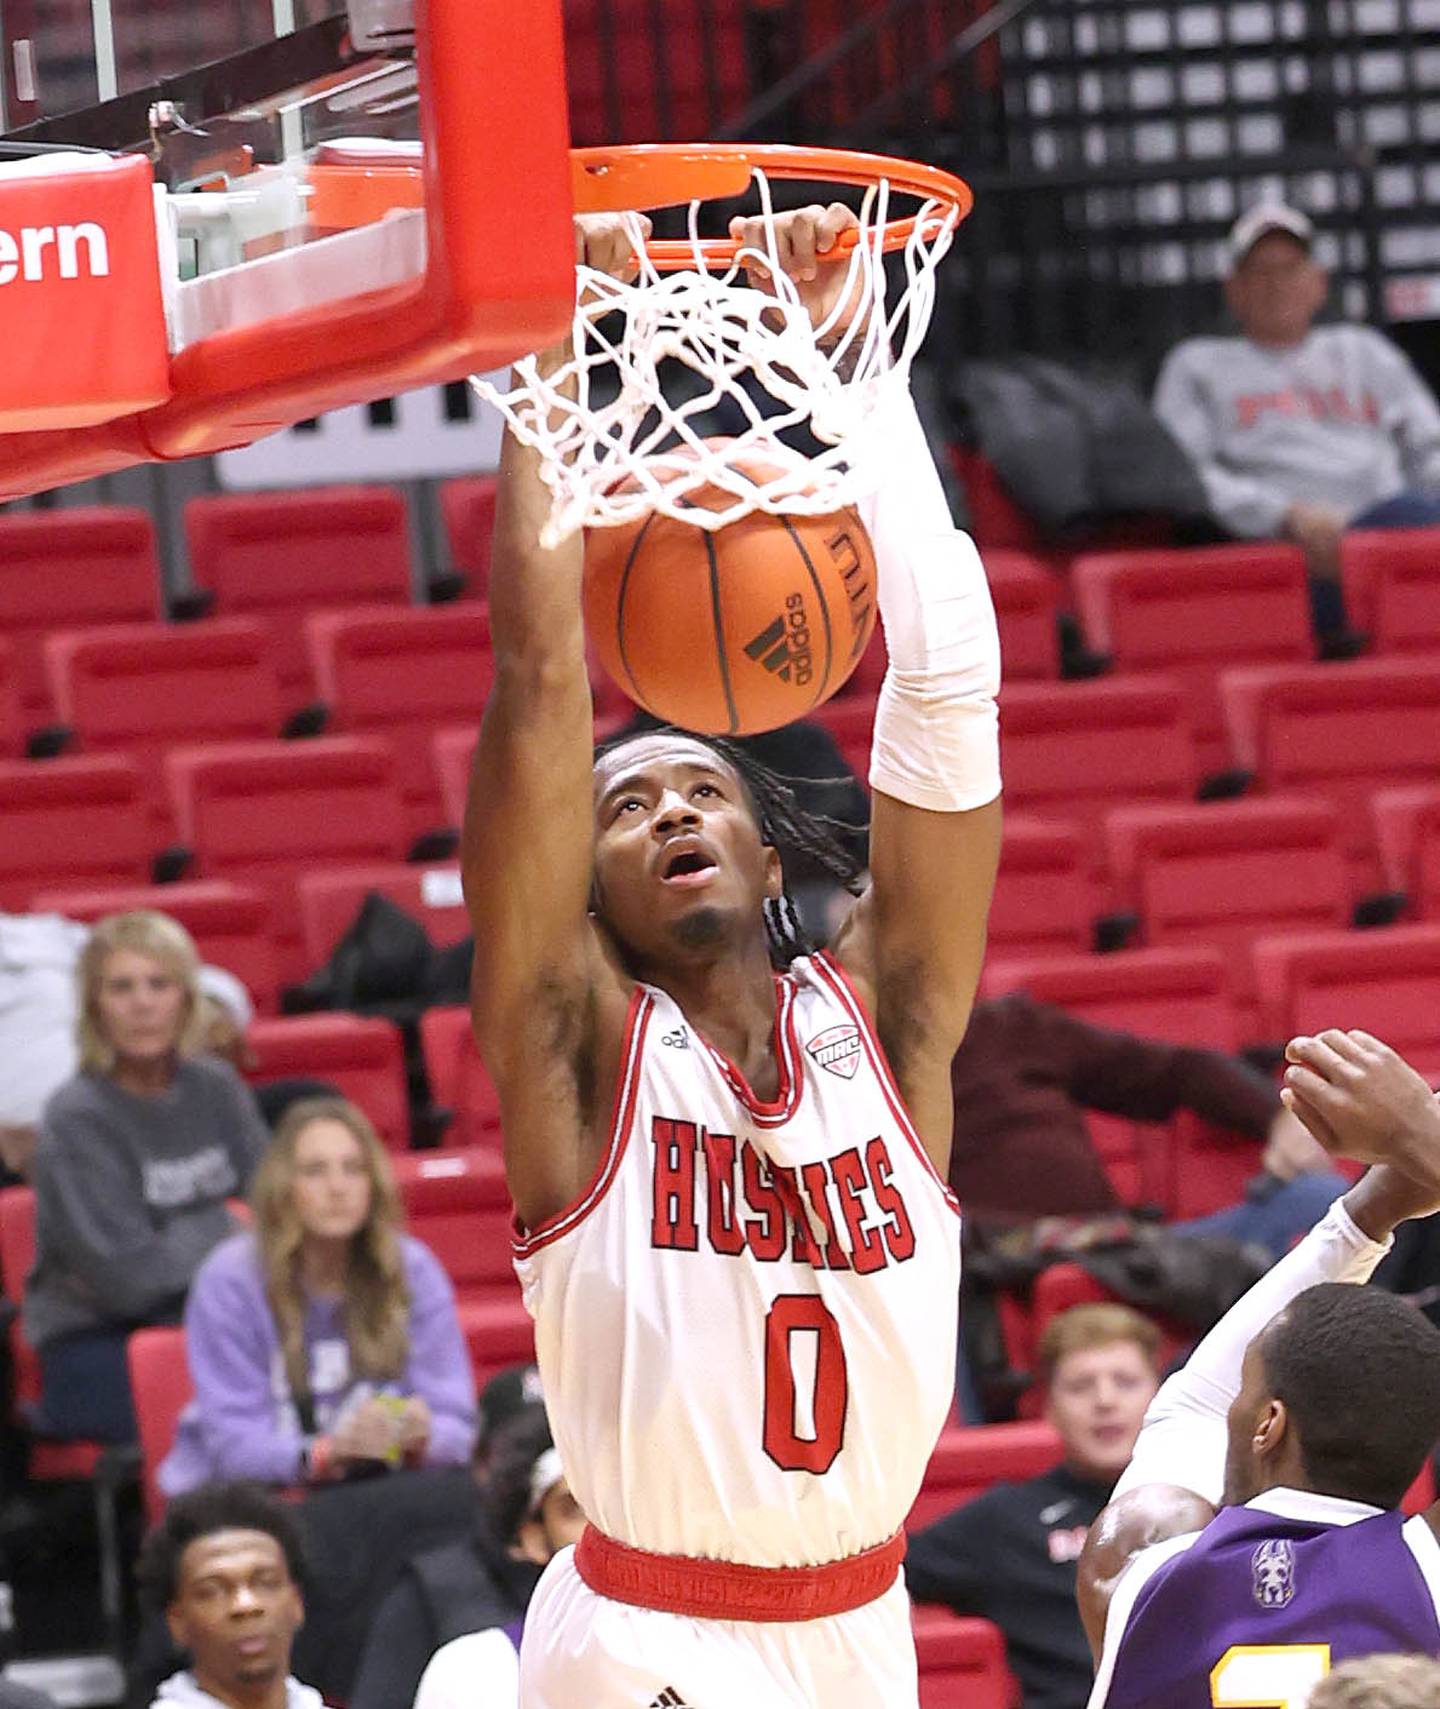 Northern Illinois Huskies guard Keshawn Williams slams home a basket during their game against Albany Tuesday, Dec. 20, 2022, in the Convocation Center at NIU in DeKalb.